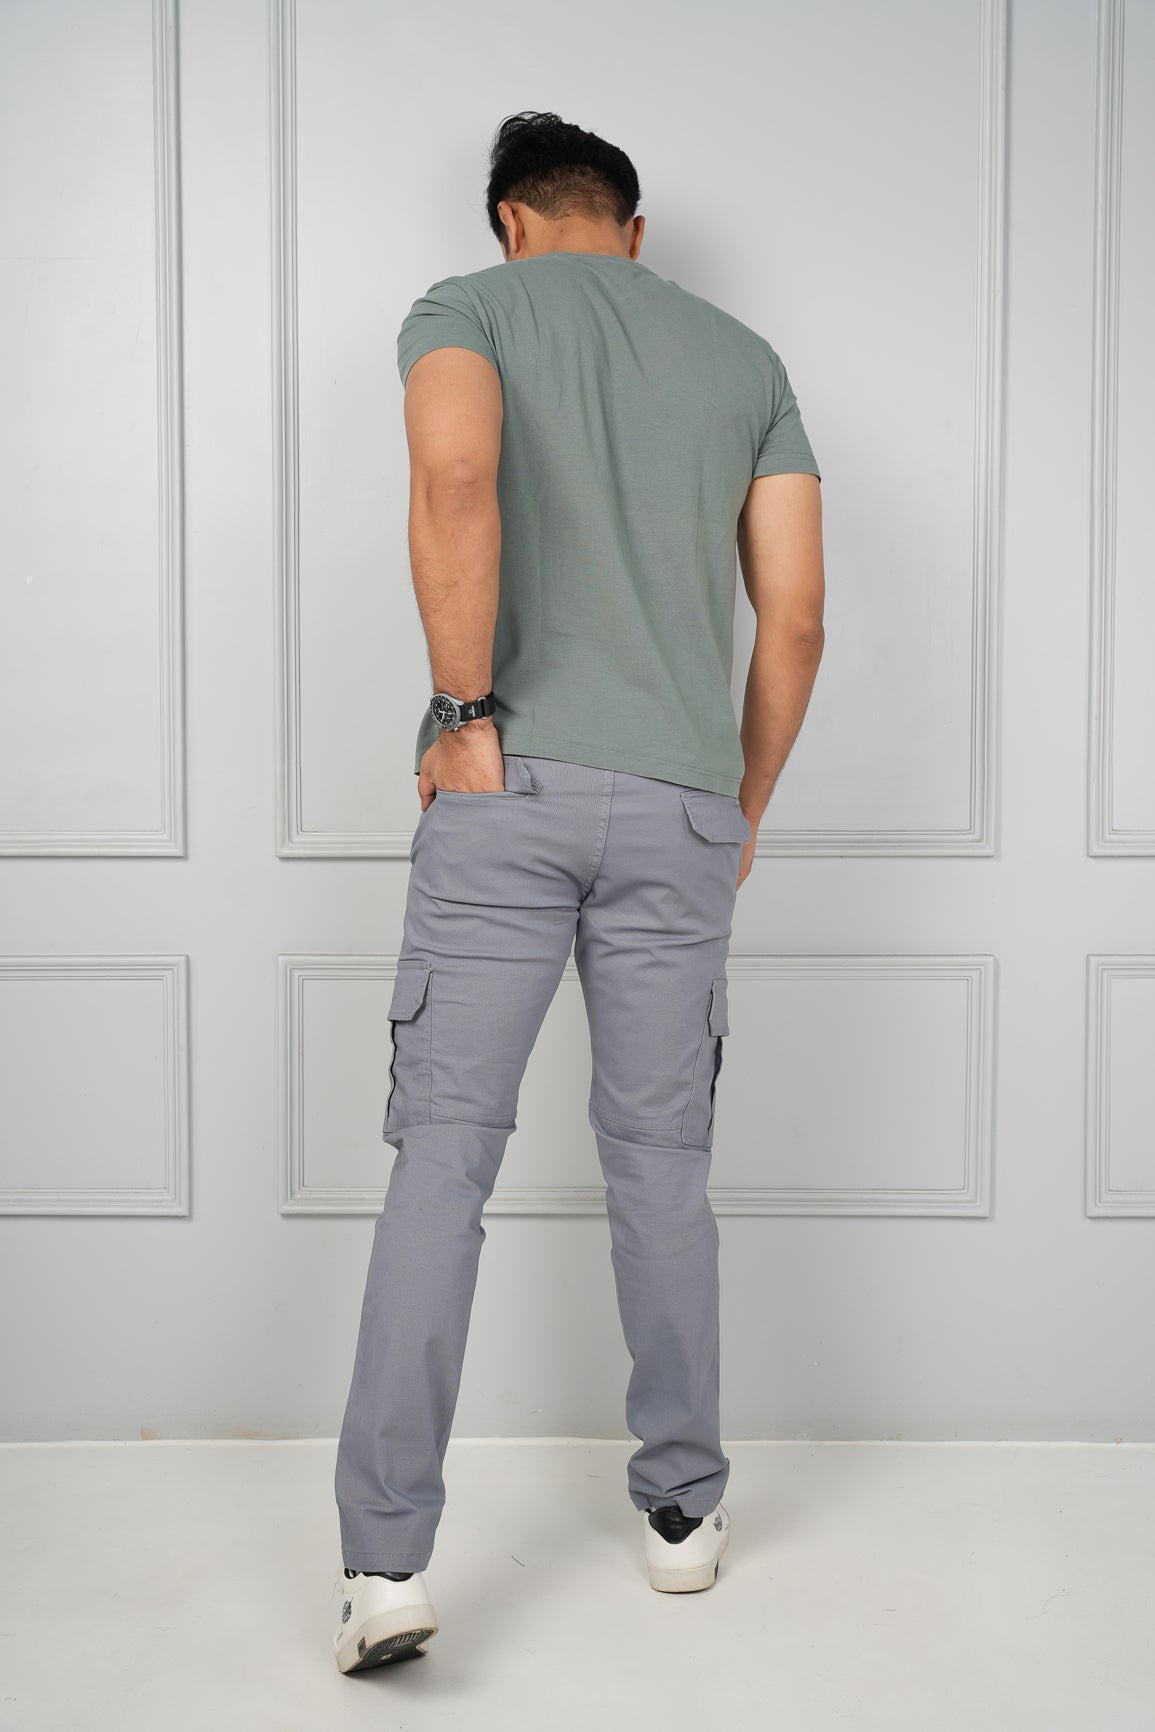 Cargo Pants Outfit Ideas : How To Style Cargo Pants For Different Occasions